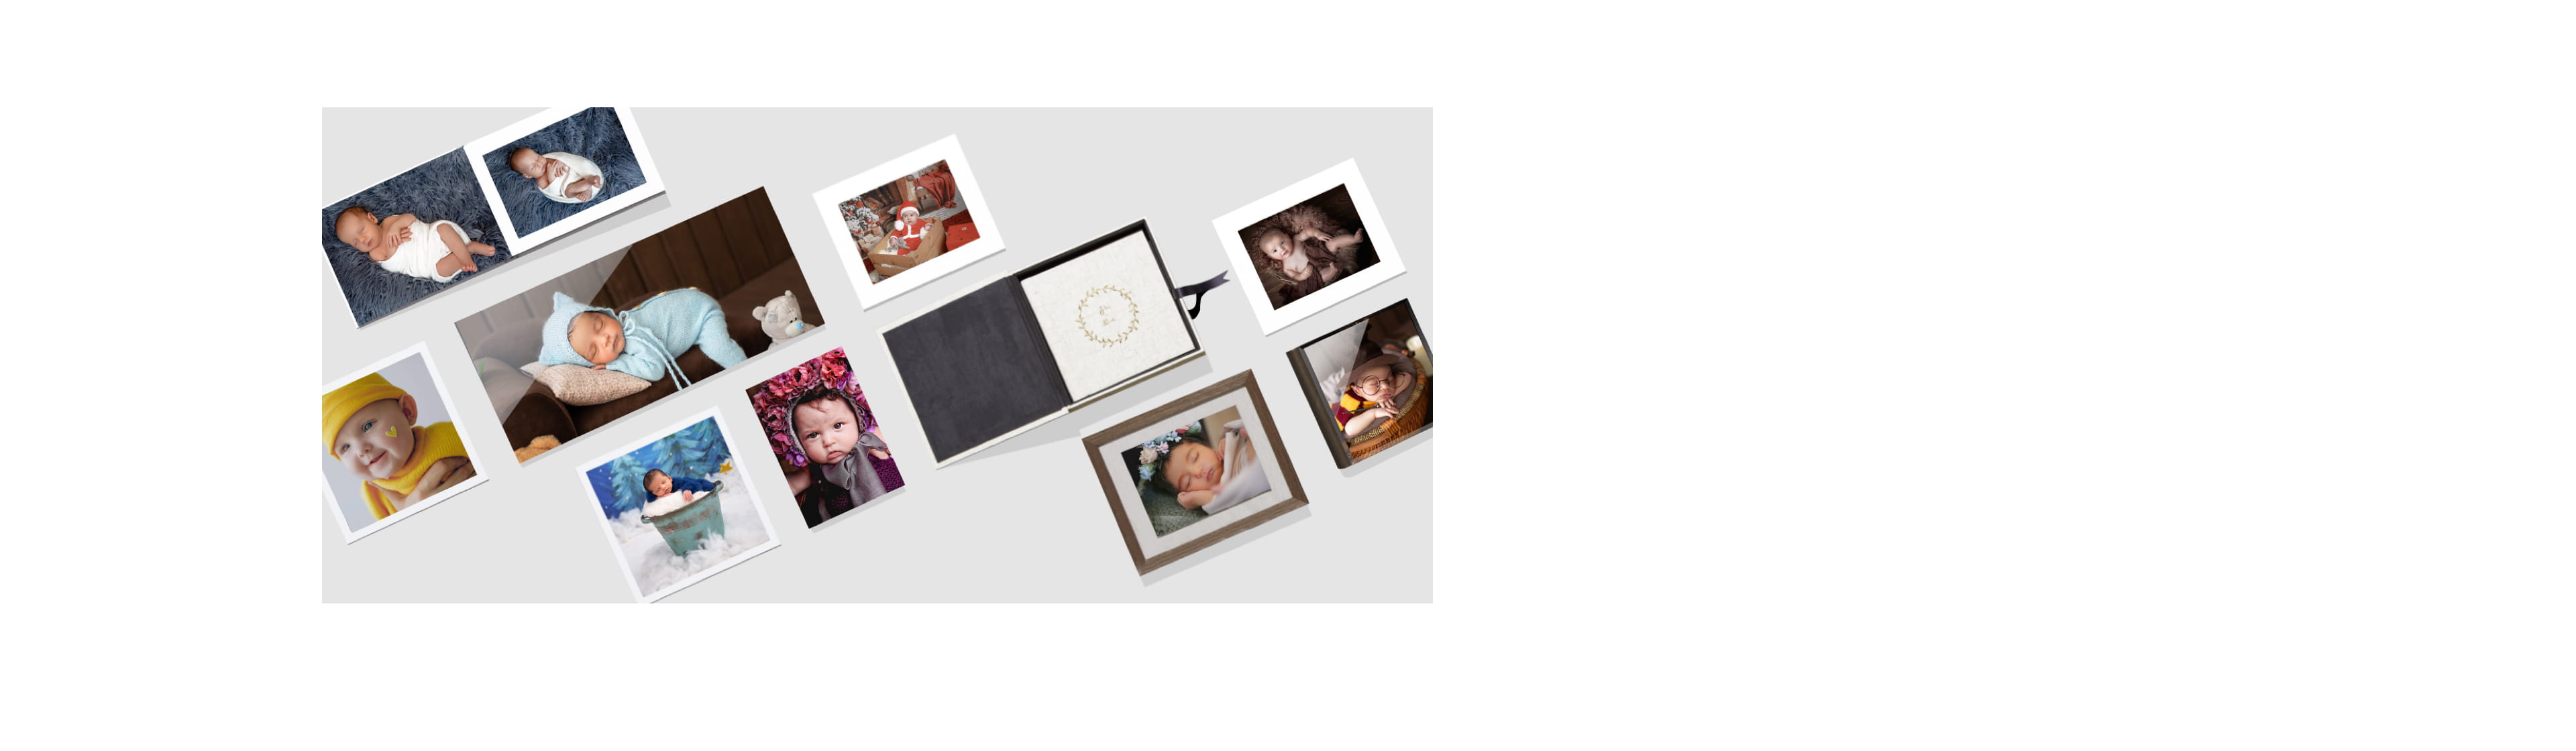 print products for newborn photography on a solid background